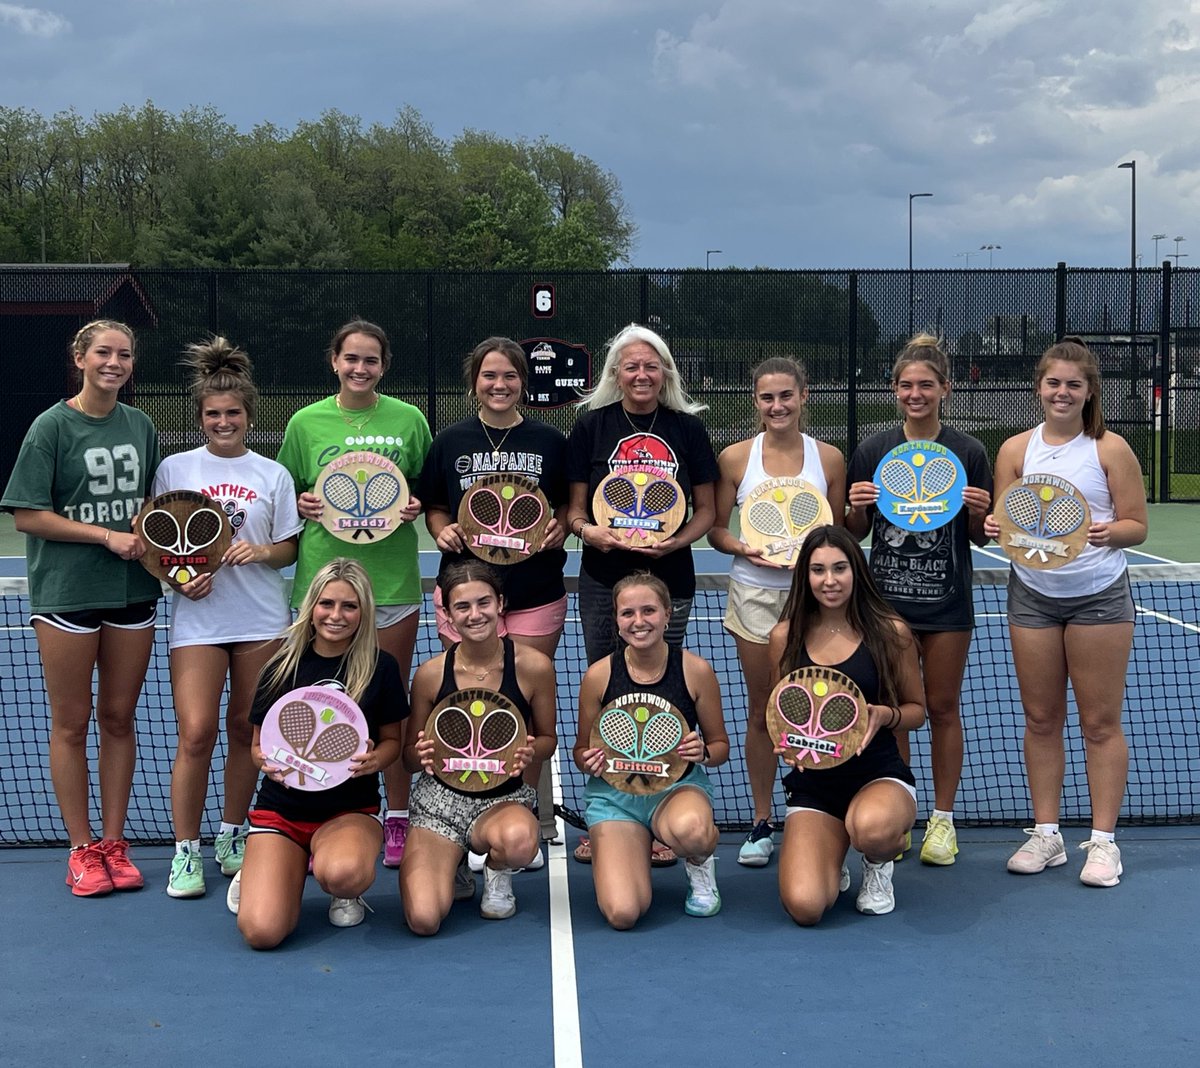 We had a great time at our “painting party” a couple of weeks ago!  Huge s/o to Twisted Appaloosa for the fun. It was just what we needed before NLC and post season started!
Come out and support our girls as we take on Northridge in the first round of Regionals tonight at 5! 🐾🎾